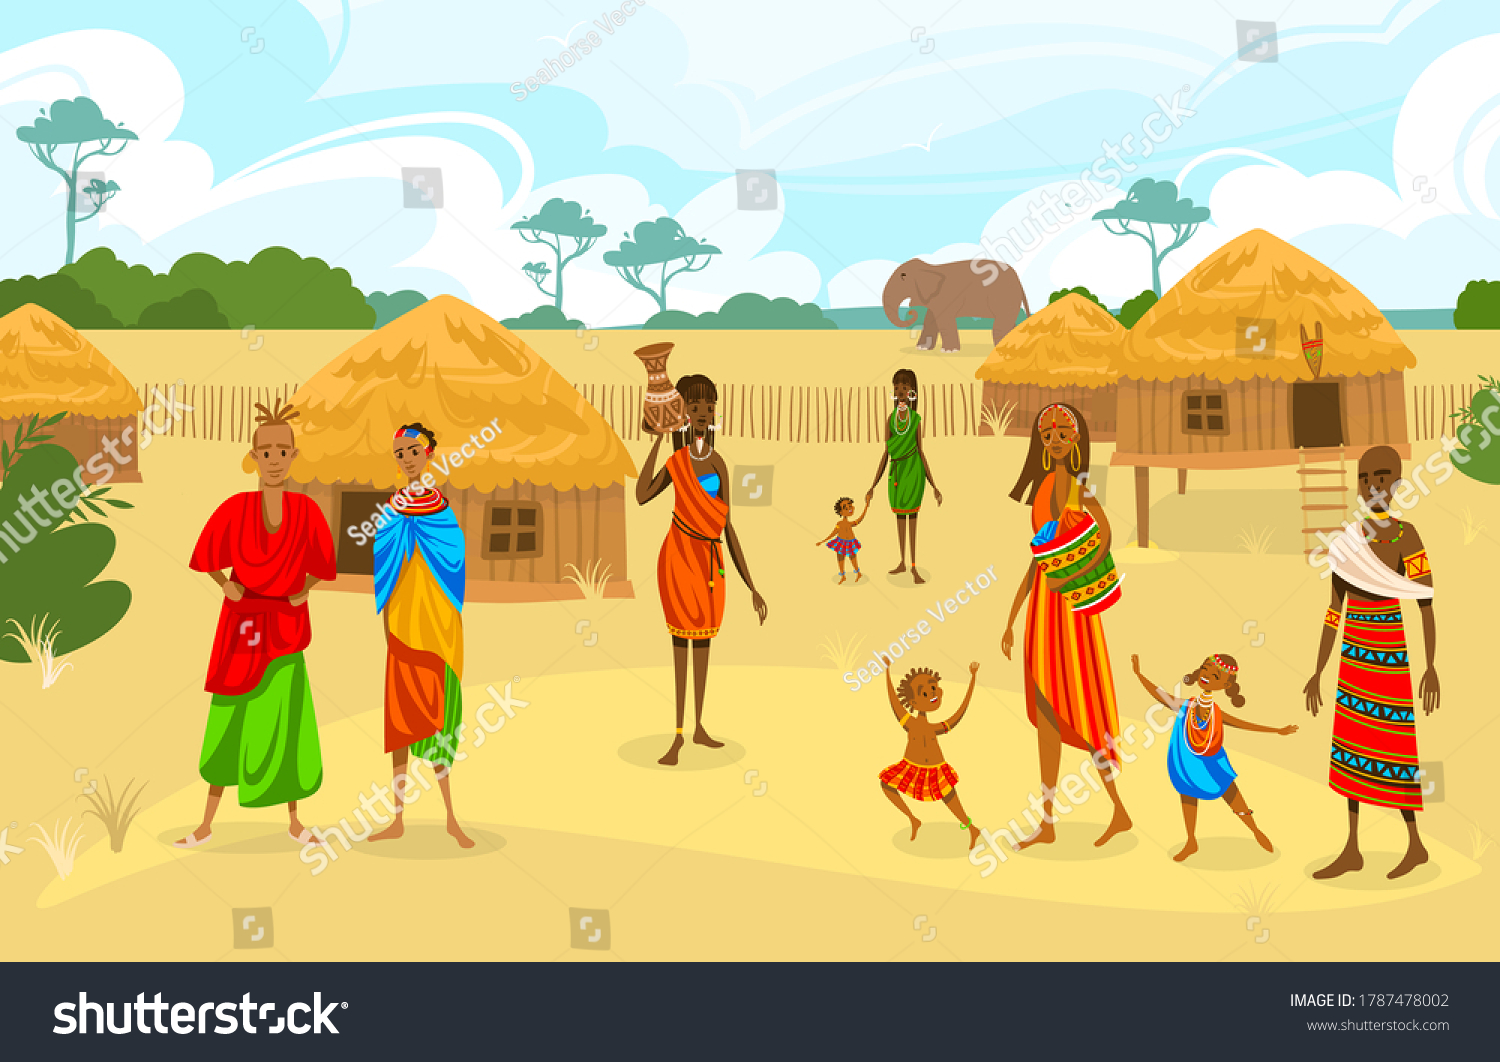 SVG of Tribe ethnic people in Africa flat vector illustration. Cartoon African woman with jug, afro character in tribal traditional costume, standing near ethnic hut house in village, rural African landscape svg